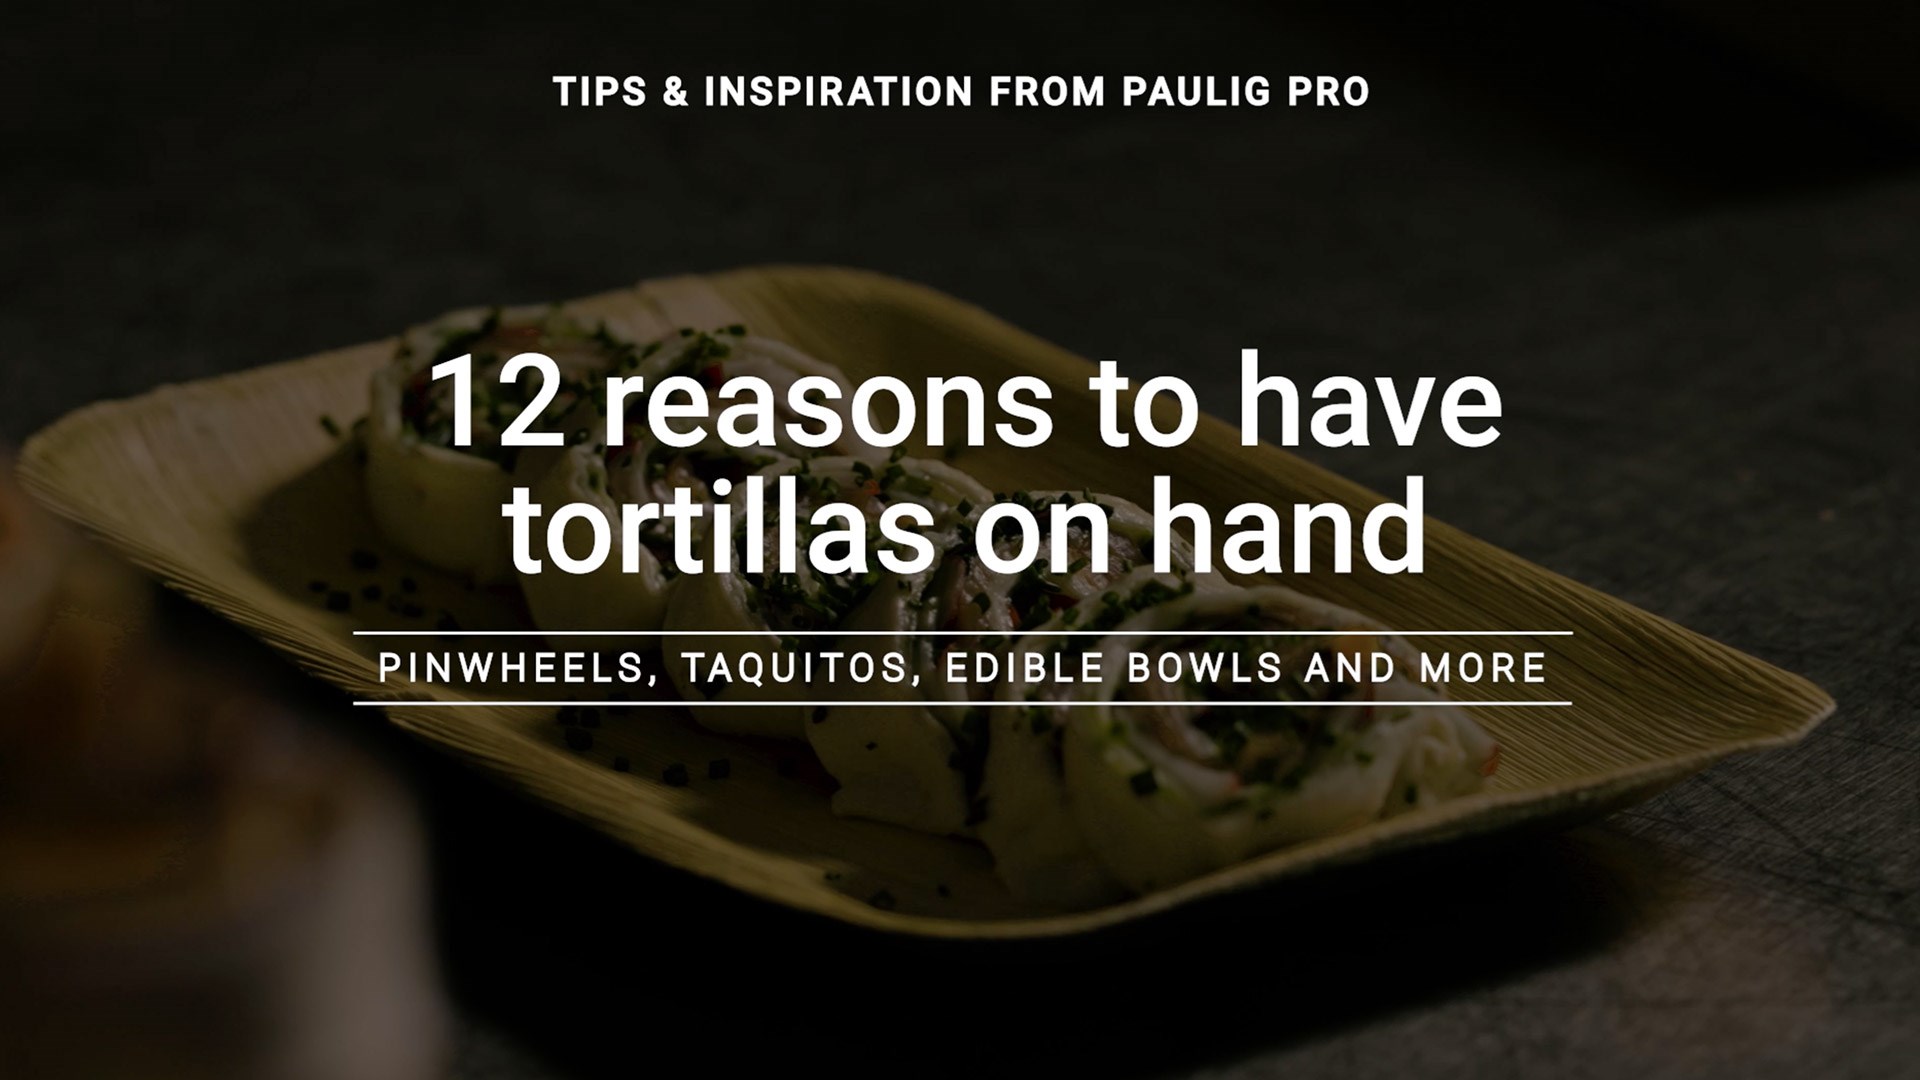 12 reasons to have tortillas on hand